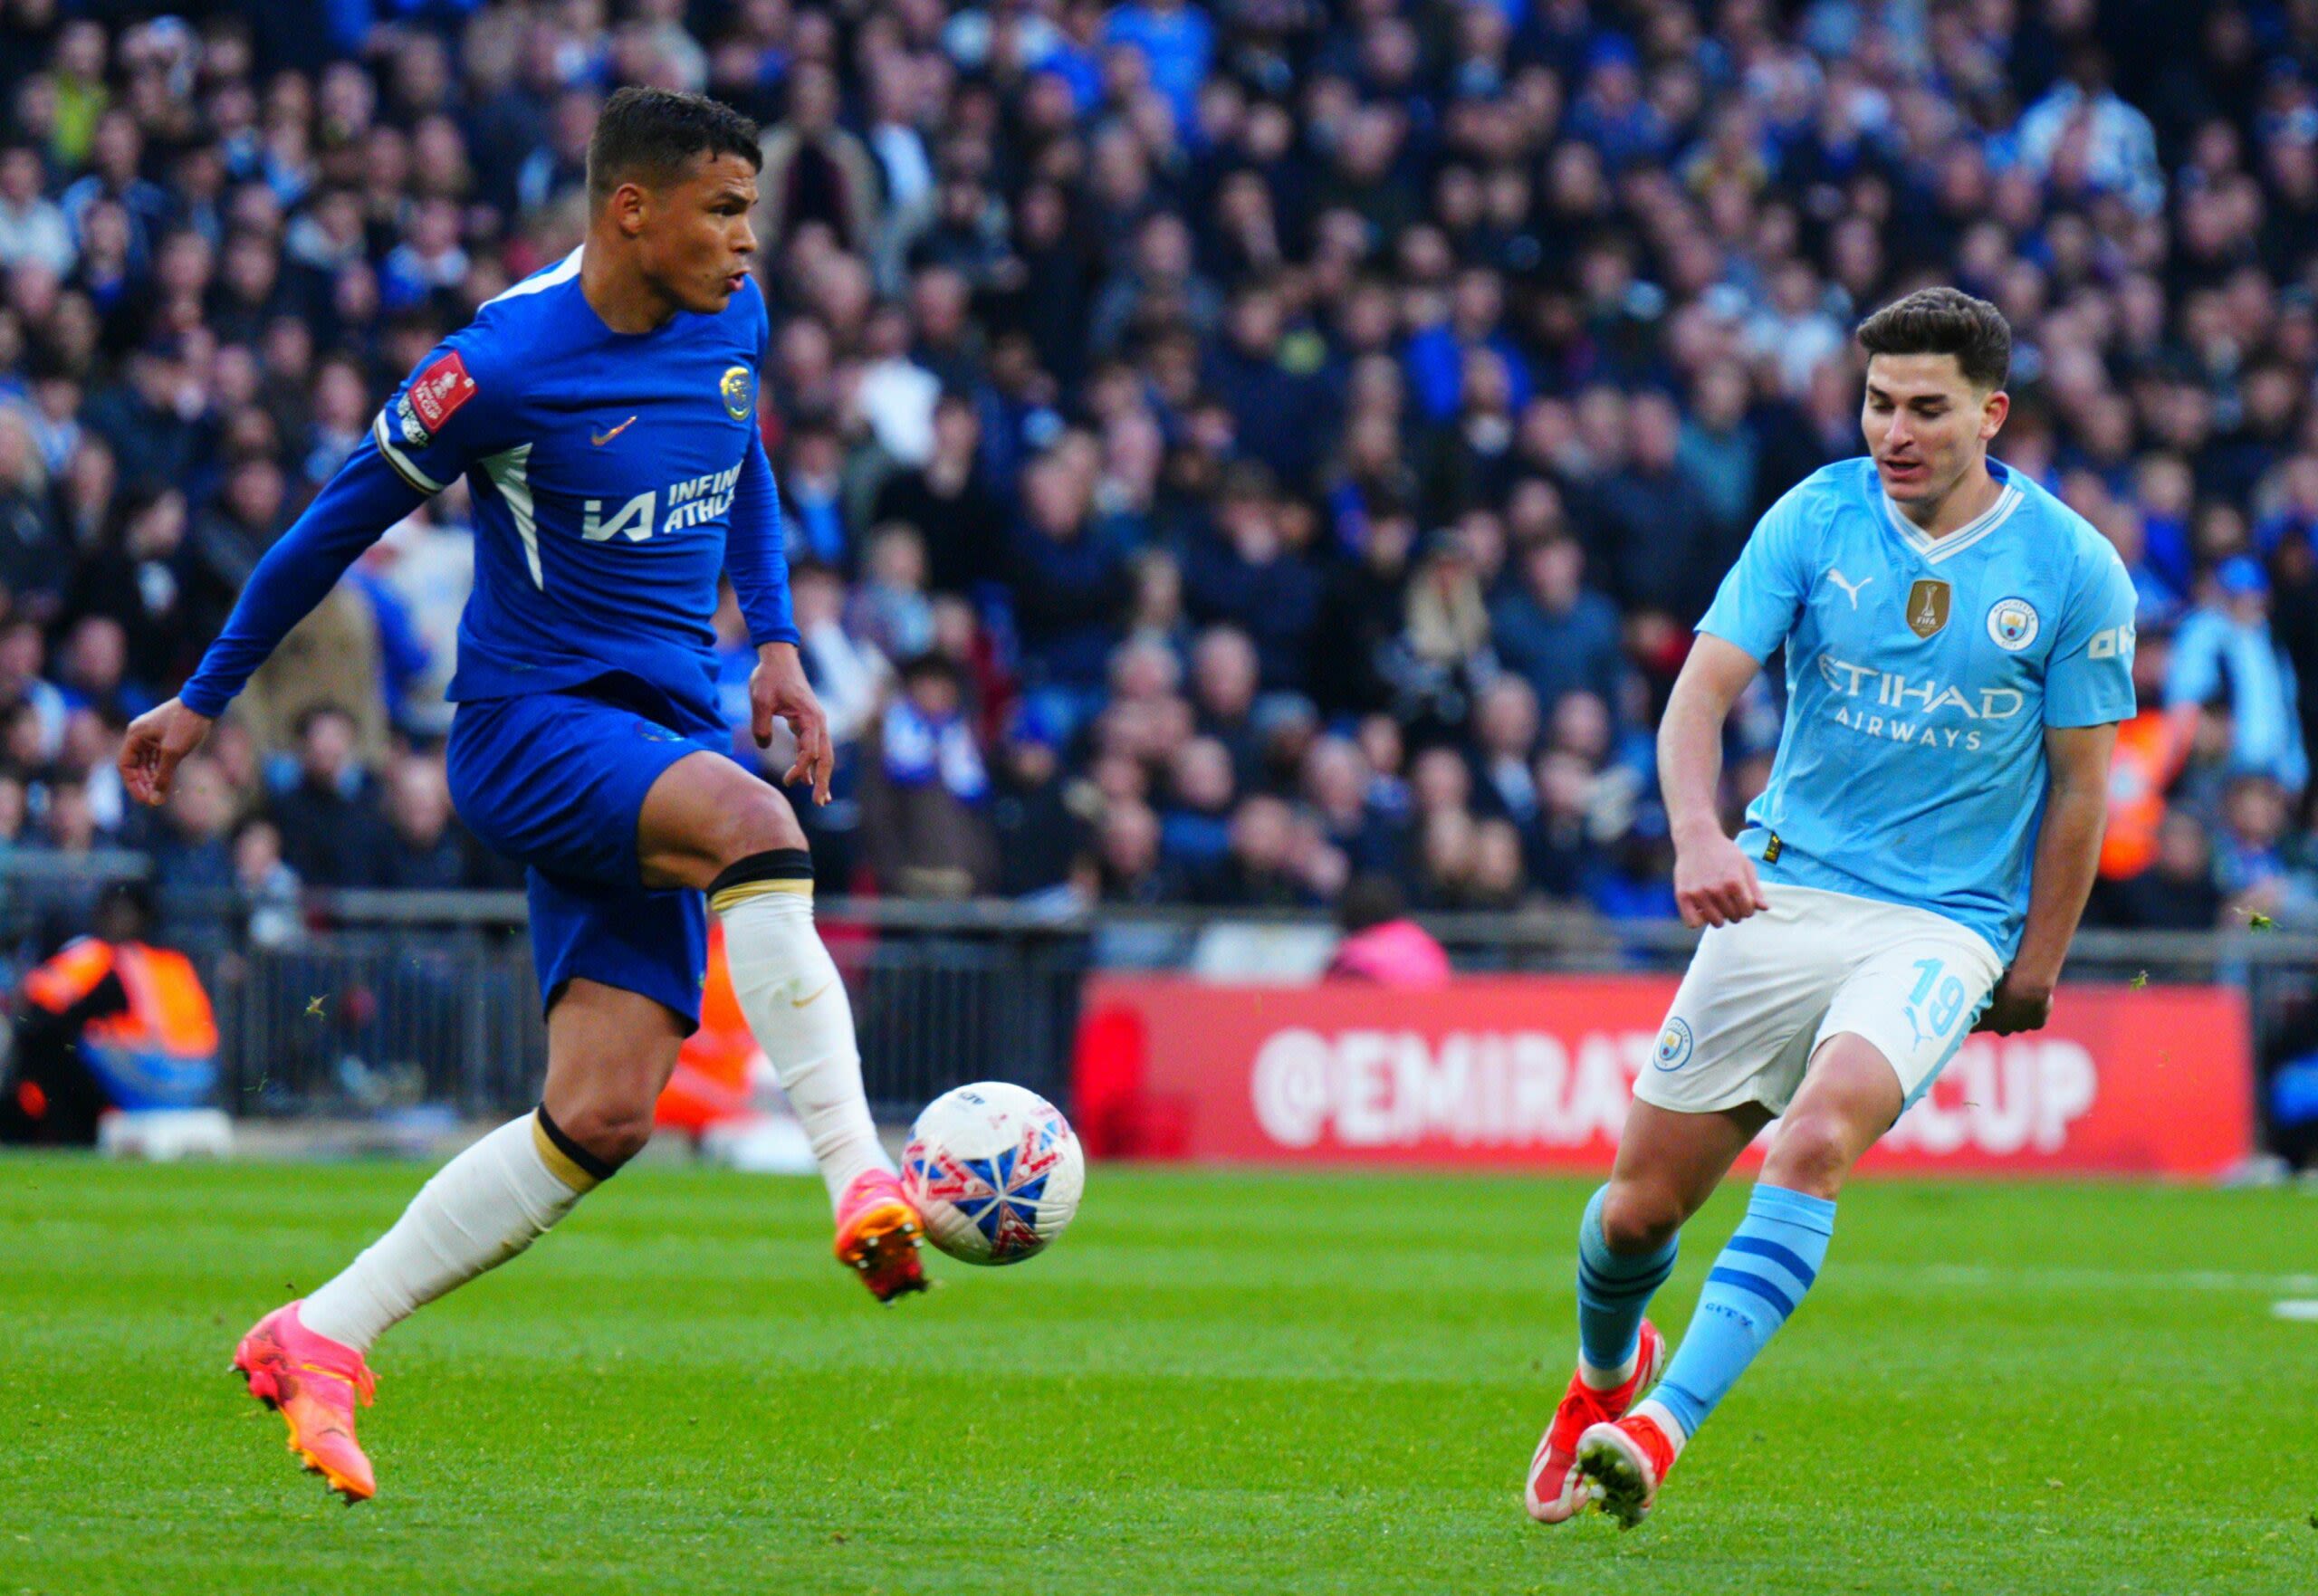 Report: Arsenal and Chelsea Eyeing Huge £77m Move for Man City Star